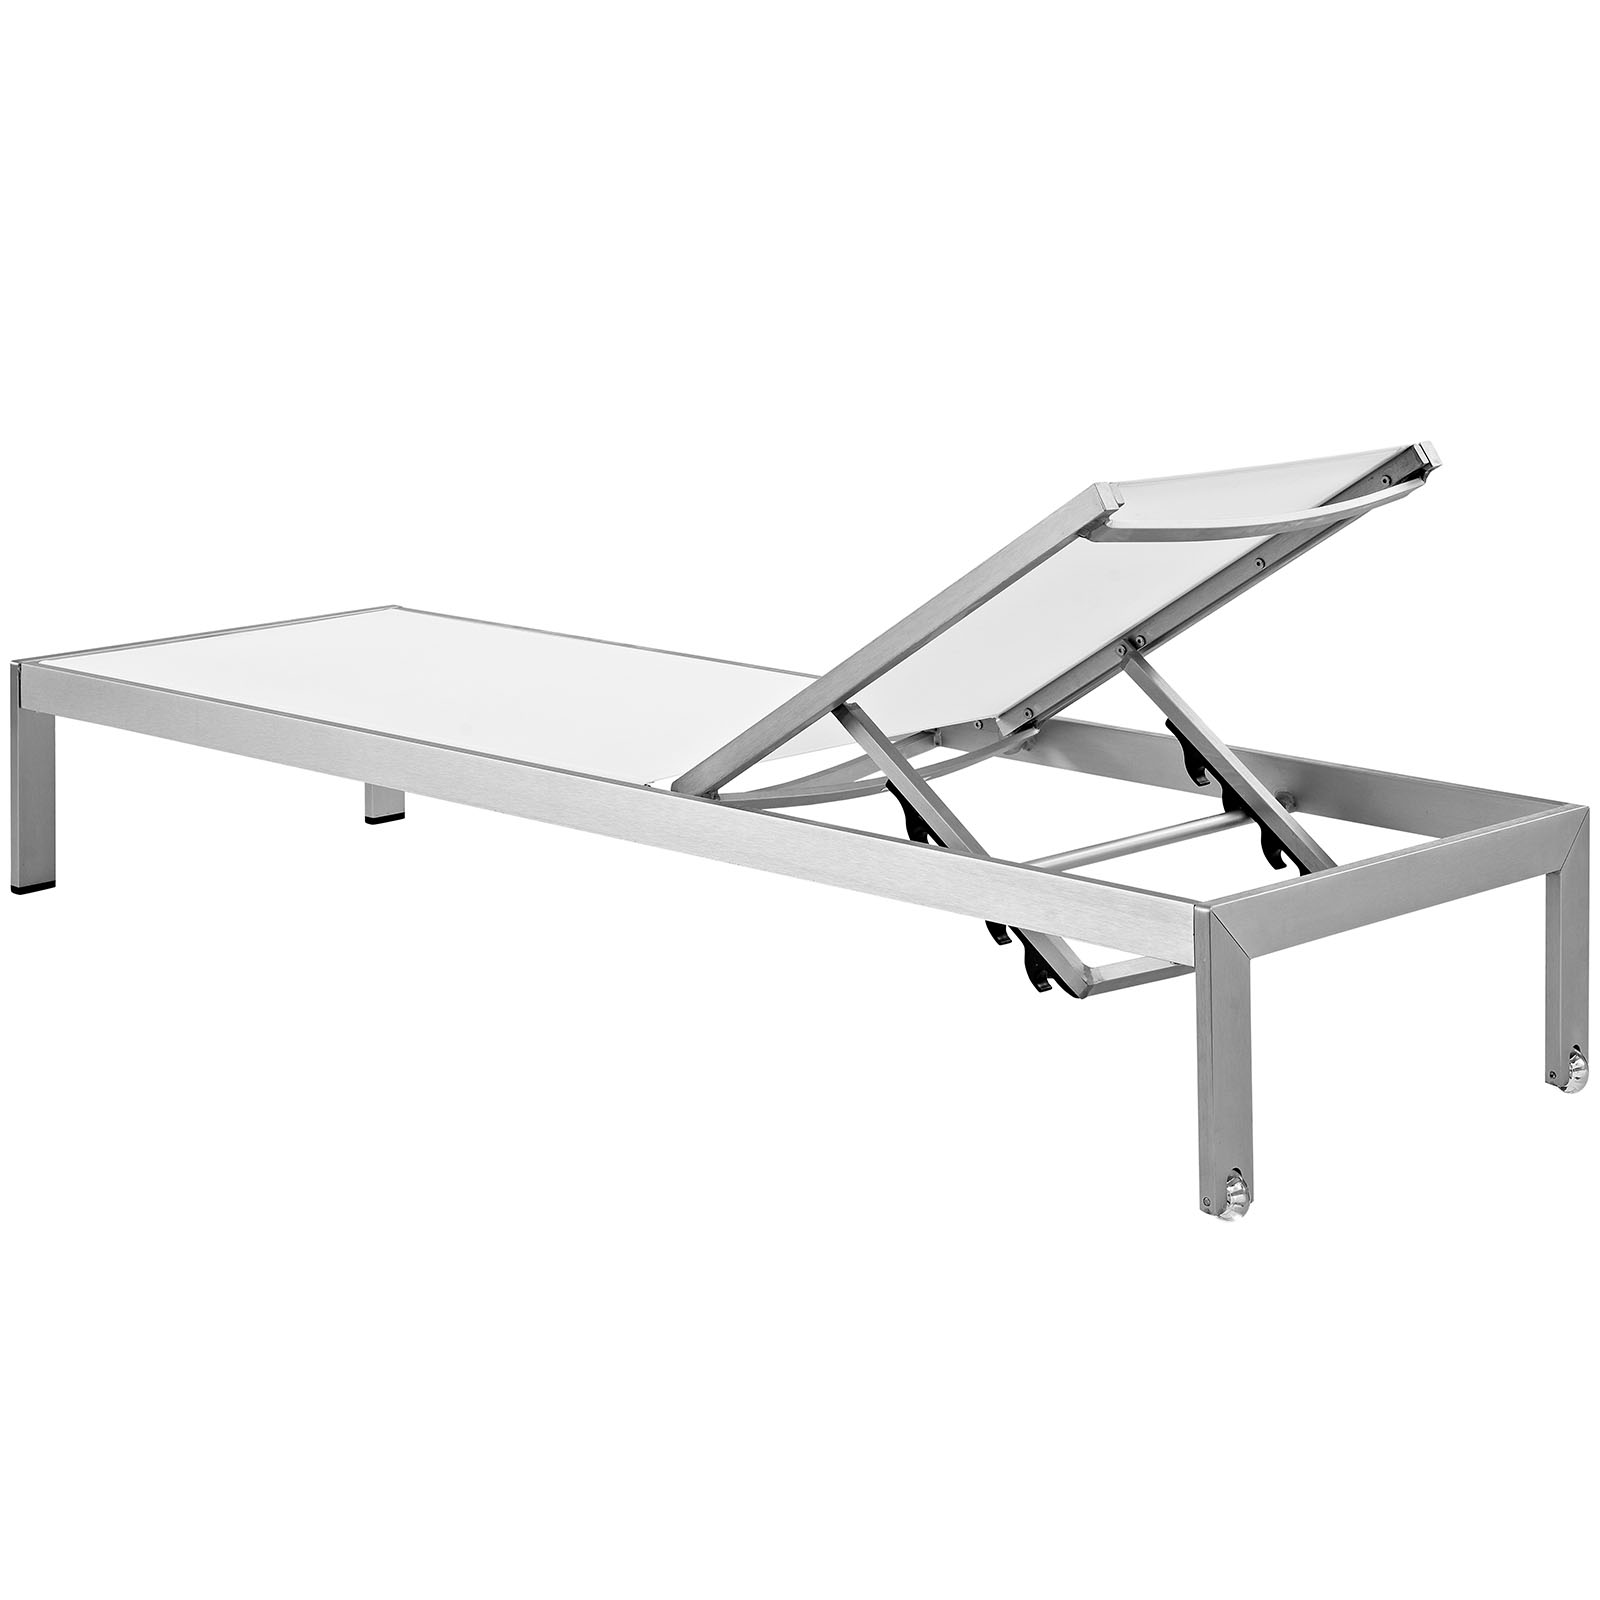 Modern Contemporary Urban Outdoor Patio Balcony Garden Furniture Lounge Chair Chaise and Side Table Set, Aluminum Metal Steel, White - image 5 of 7